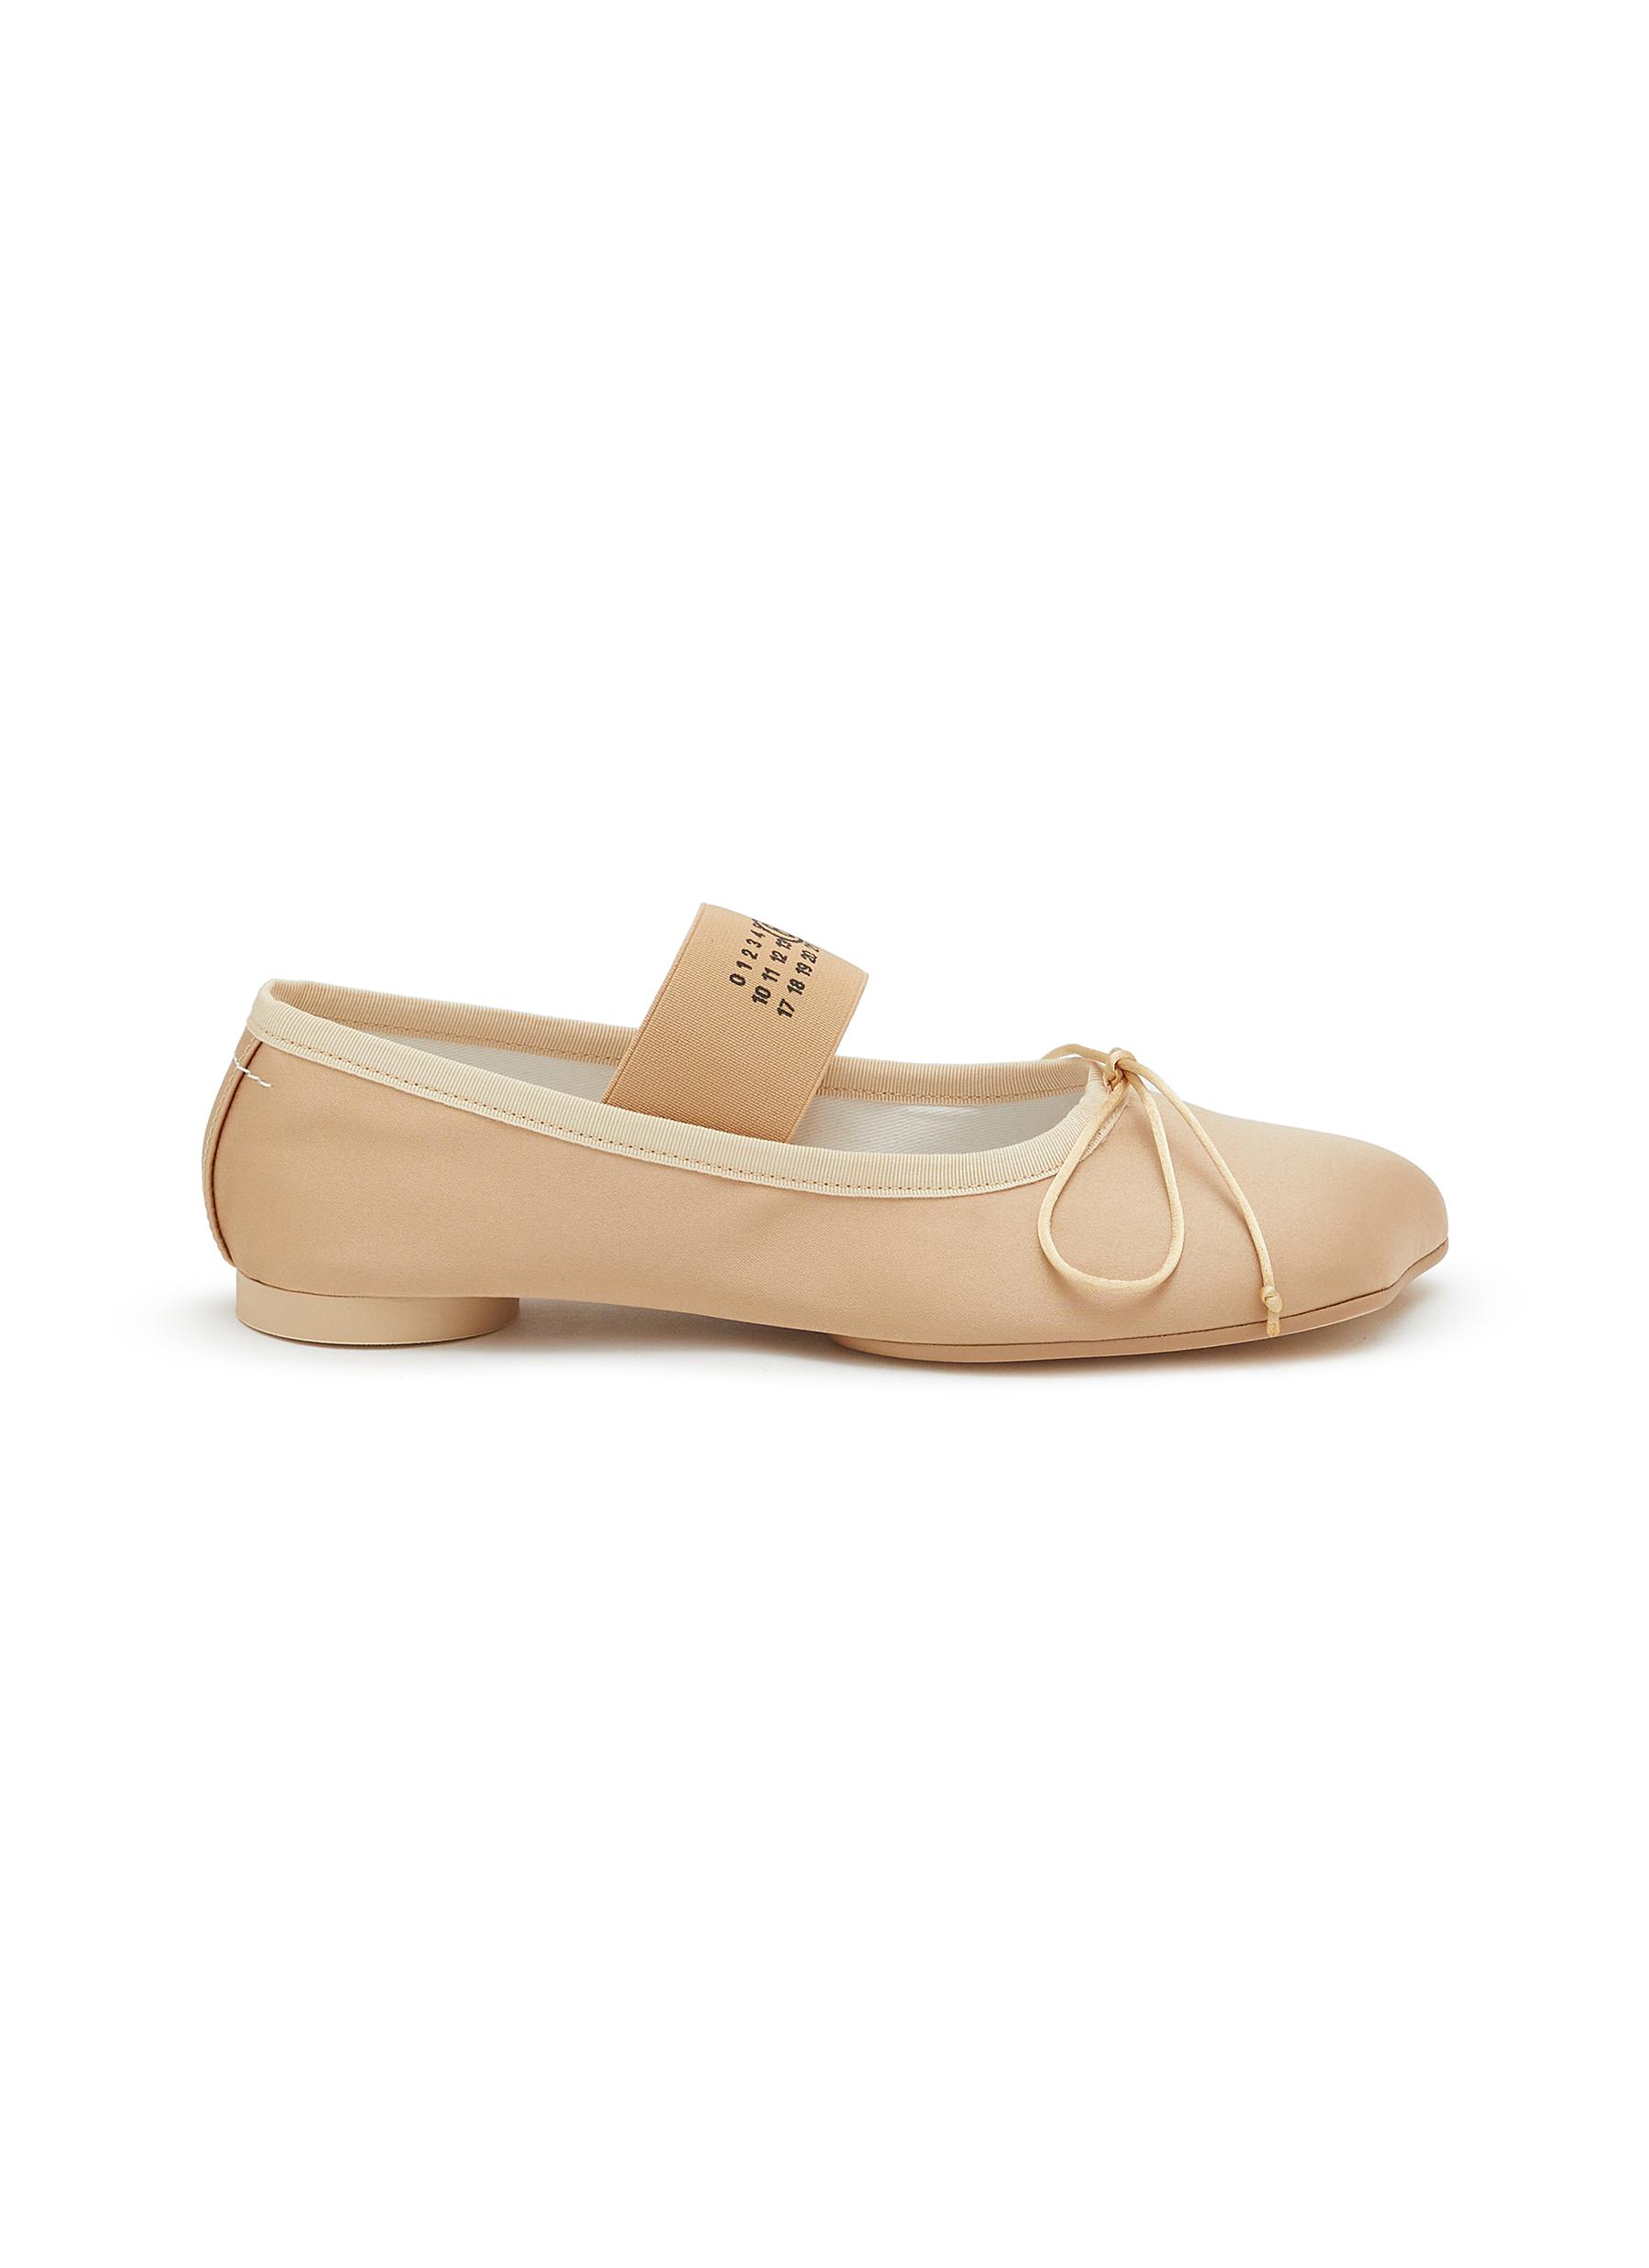 Mary Jane Satin Ballet Shoes